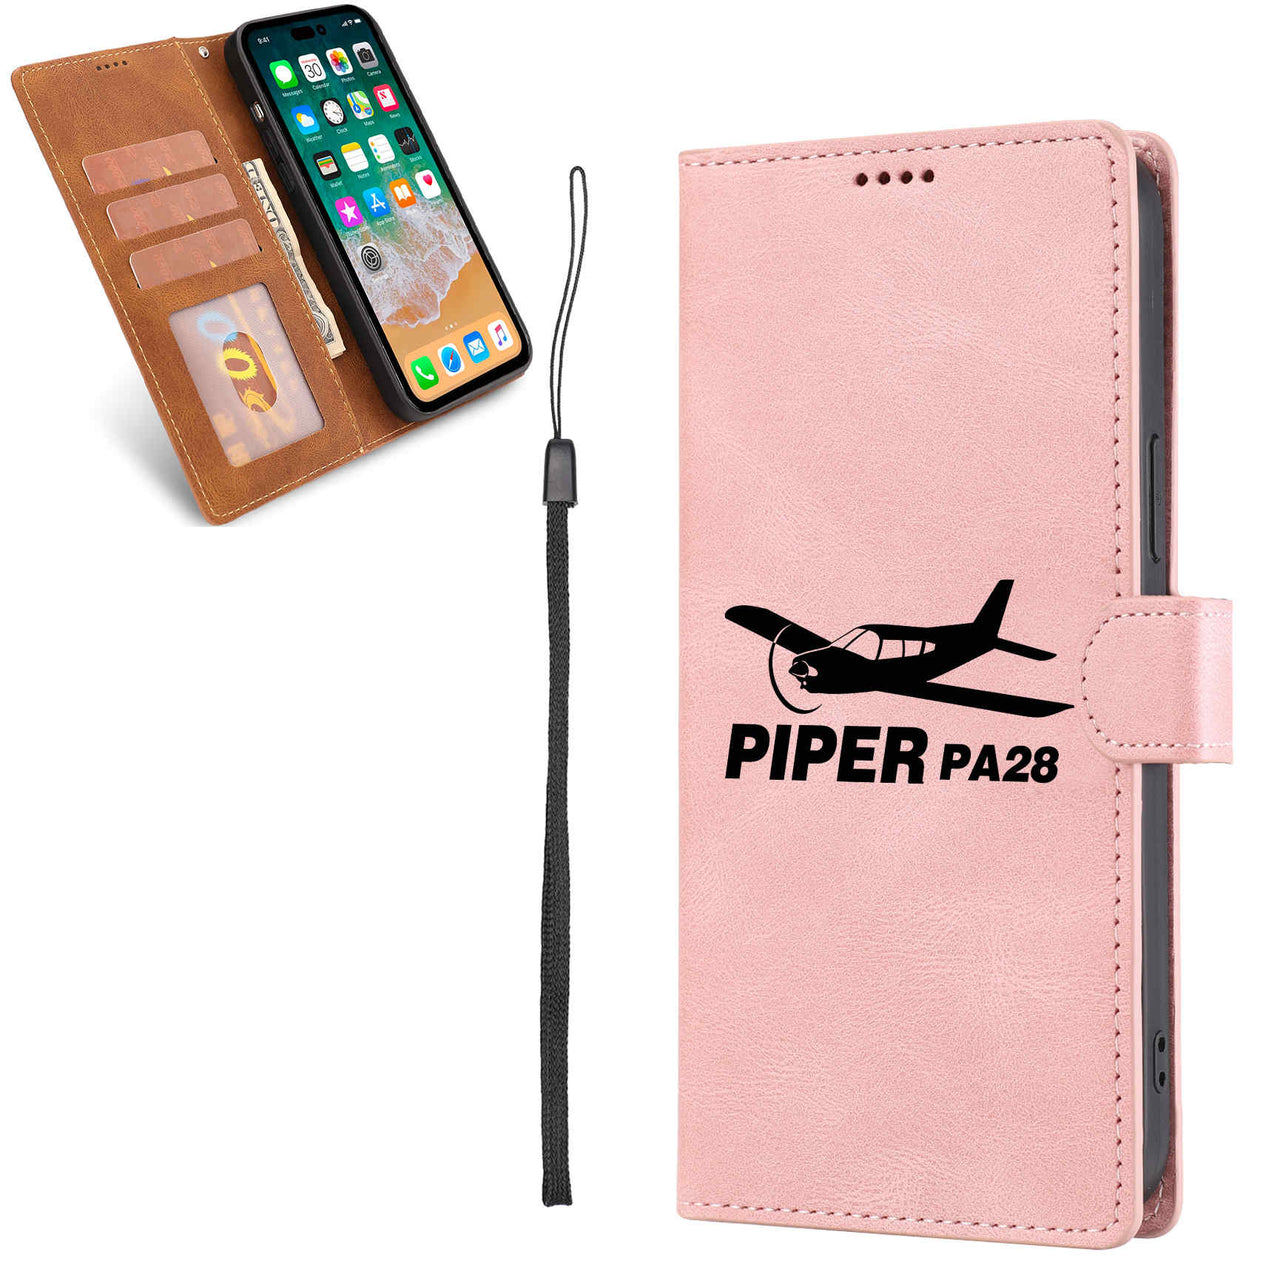 The Piper PA28 Leather Samsung A Cases